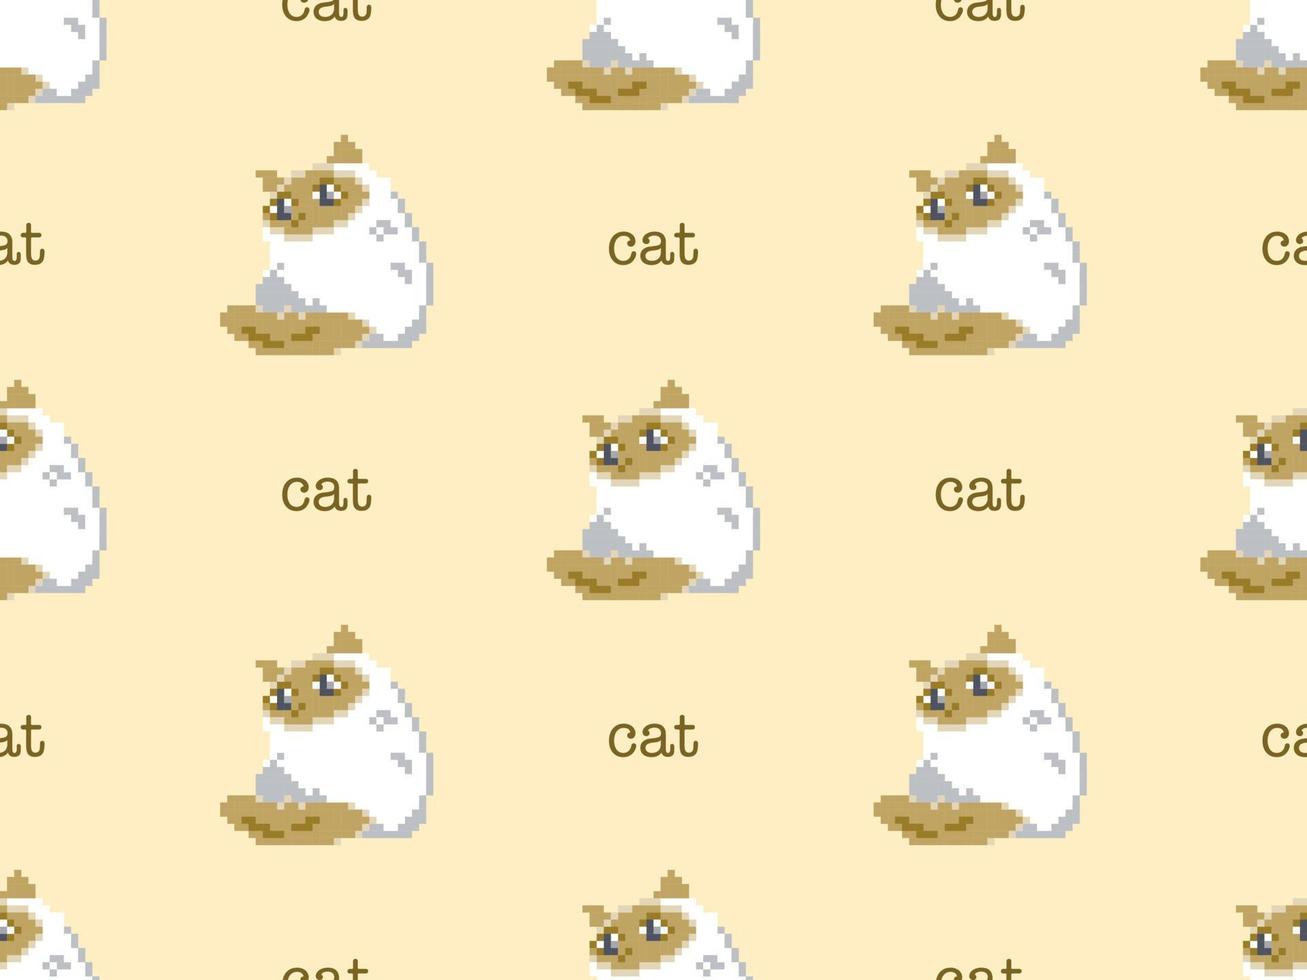 Cat cartoon character seamless pattern on yellow background. Pixel style vector